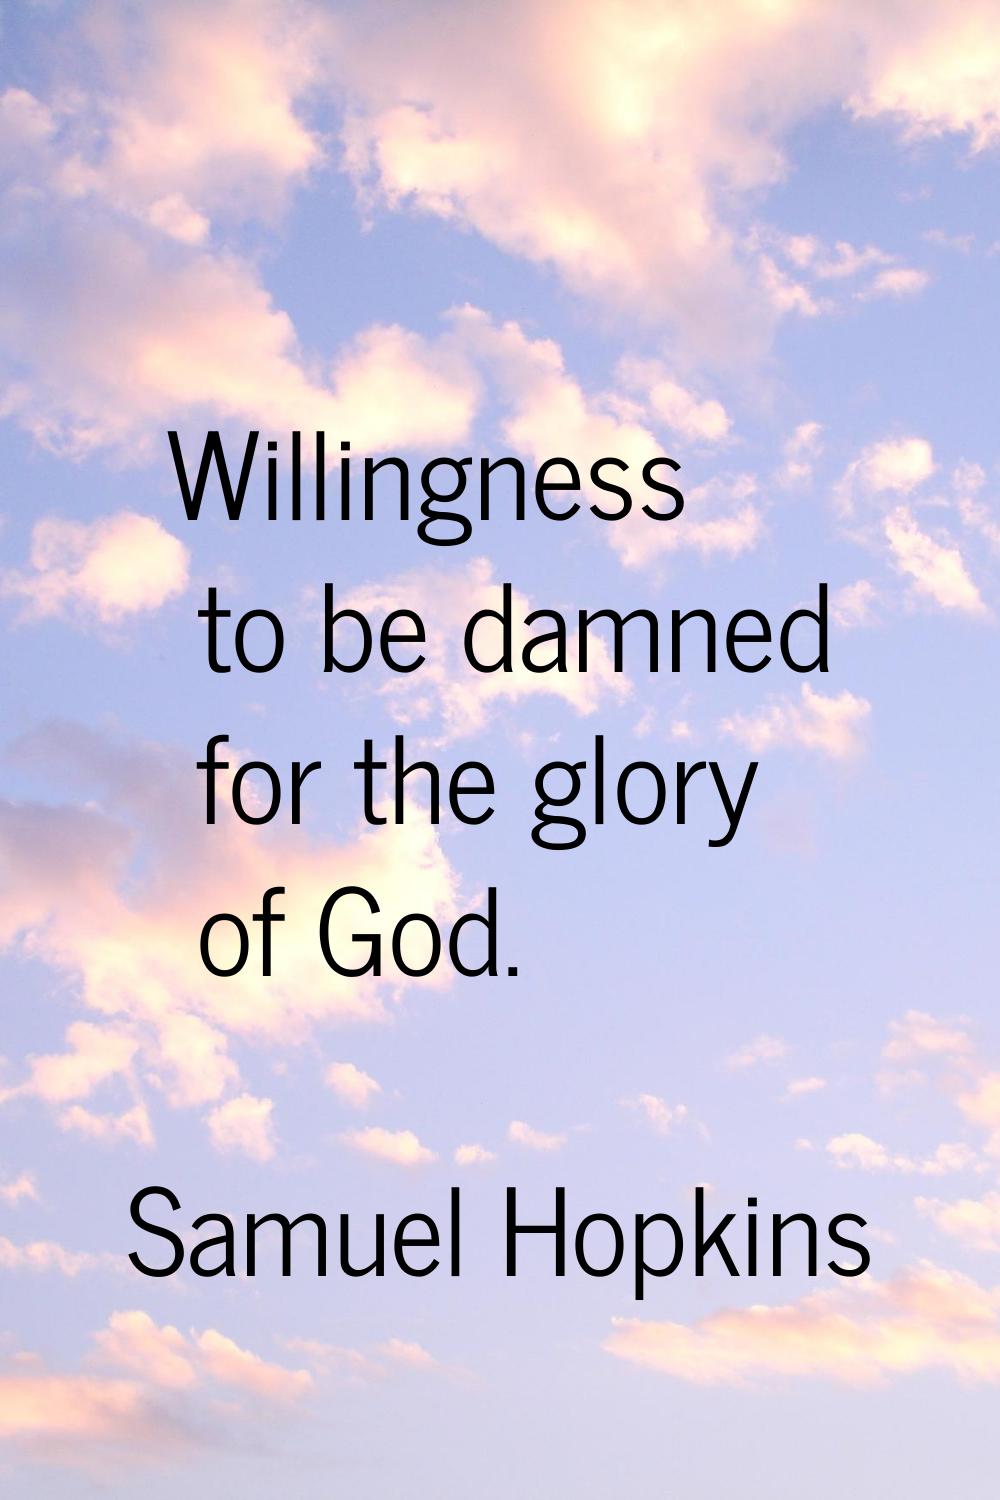 Willingness to be damned for the glory of God.